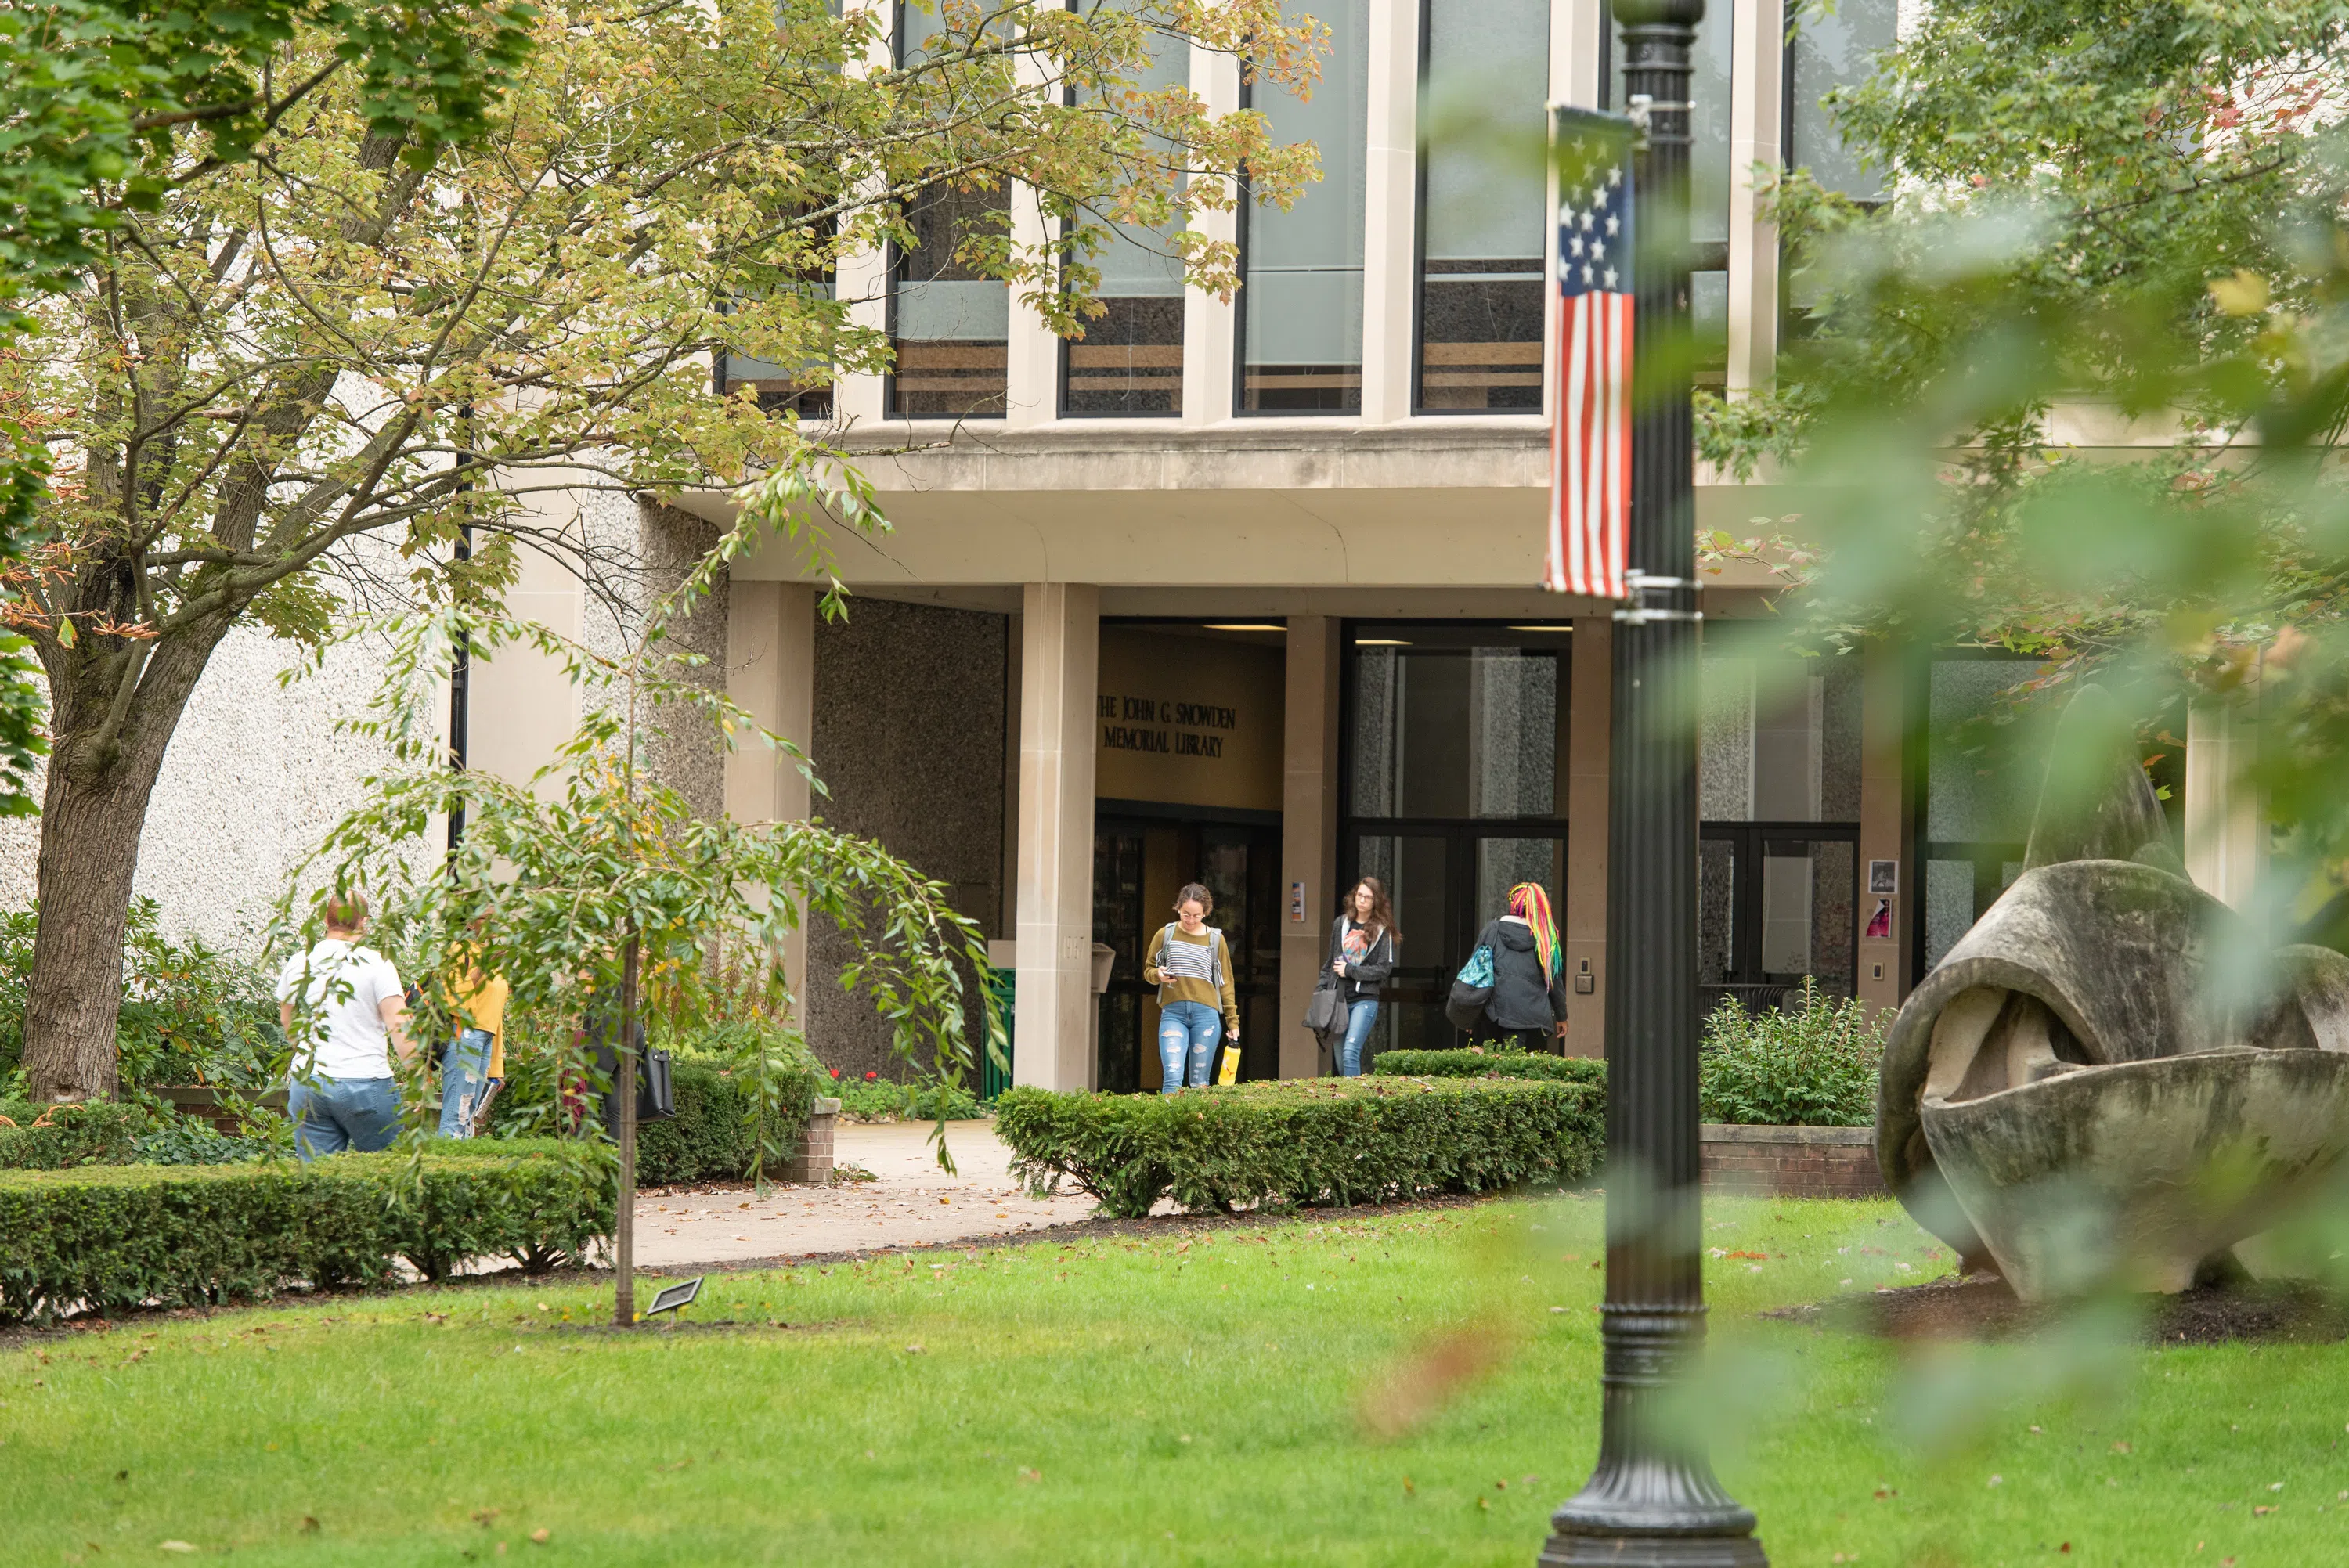 Students entering and exiting Wendle Hall Academic Center on a fall day.